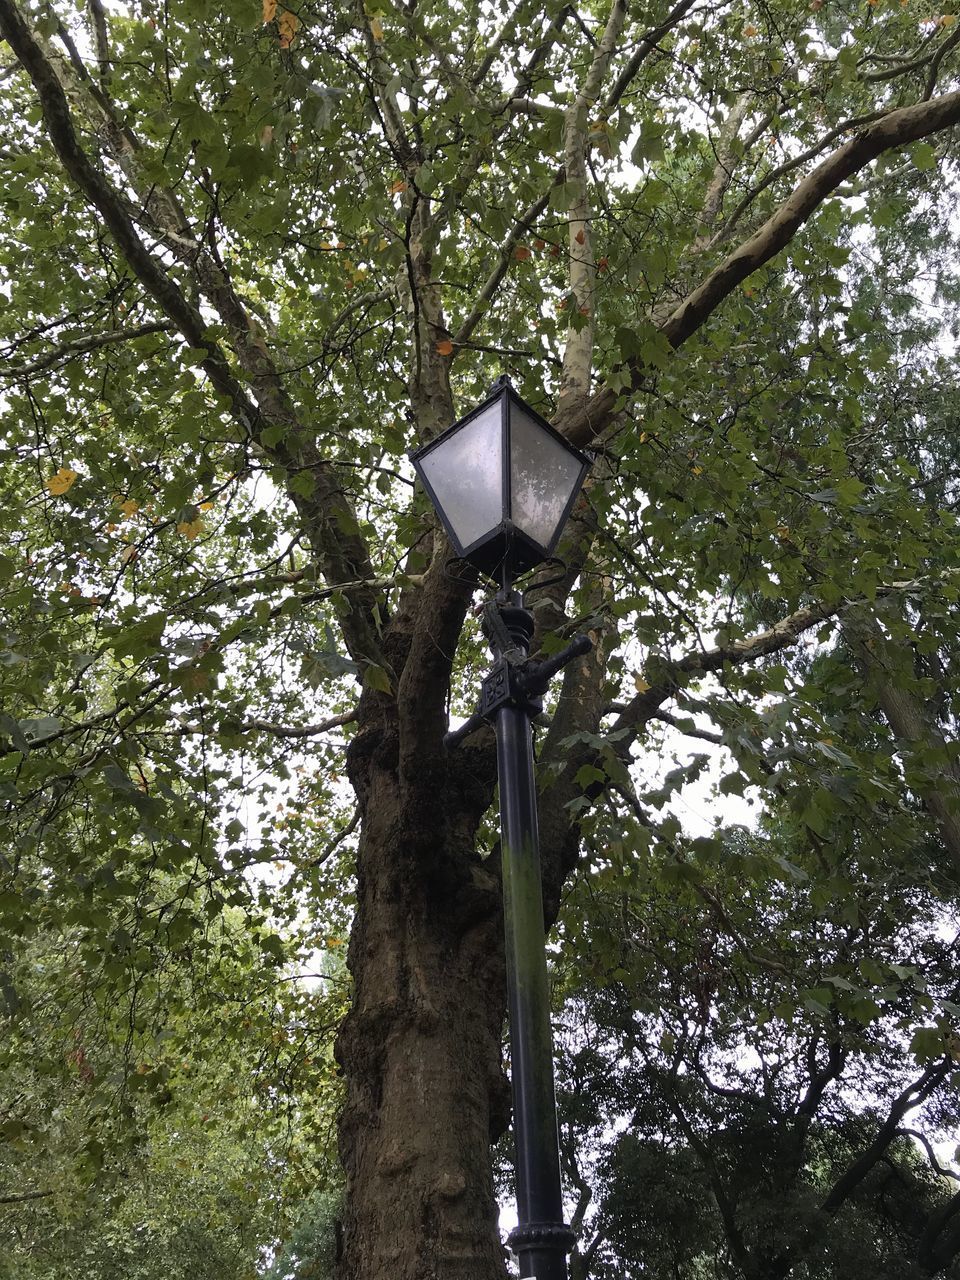 LOW ANGLE VIEW OF STREET LIGHT AGAINST TREES